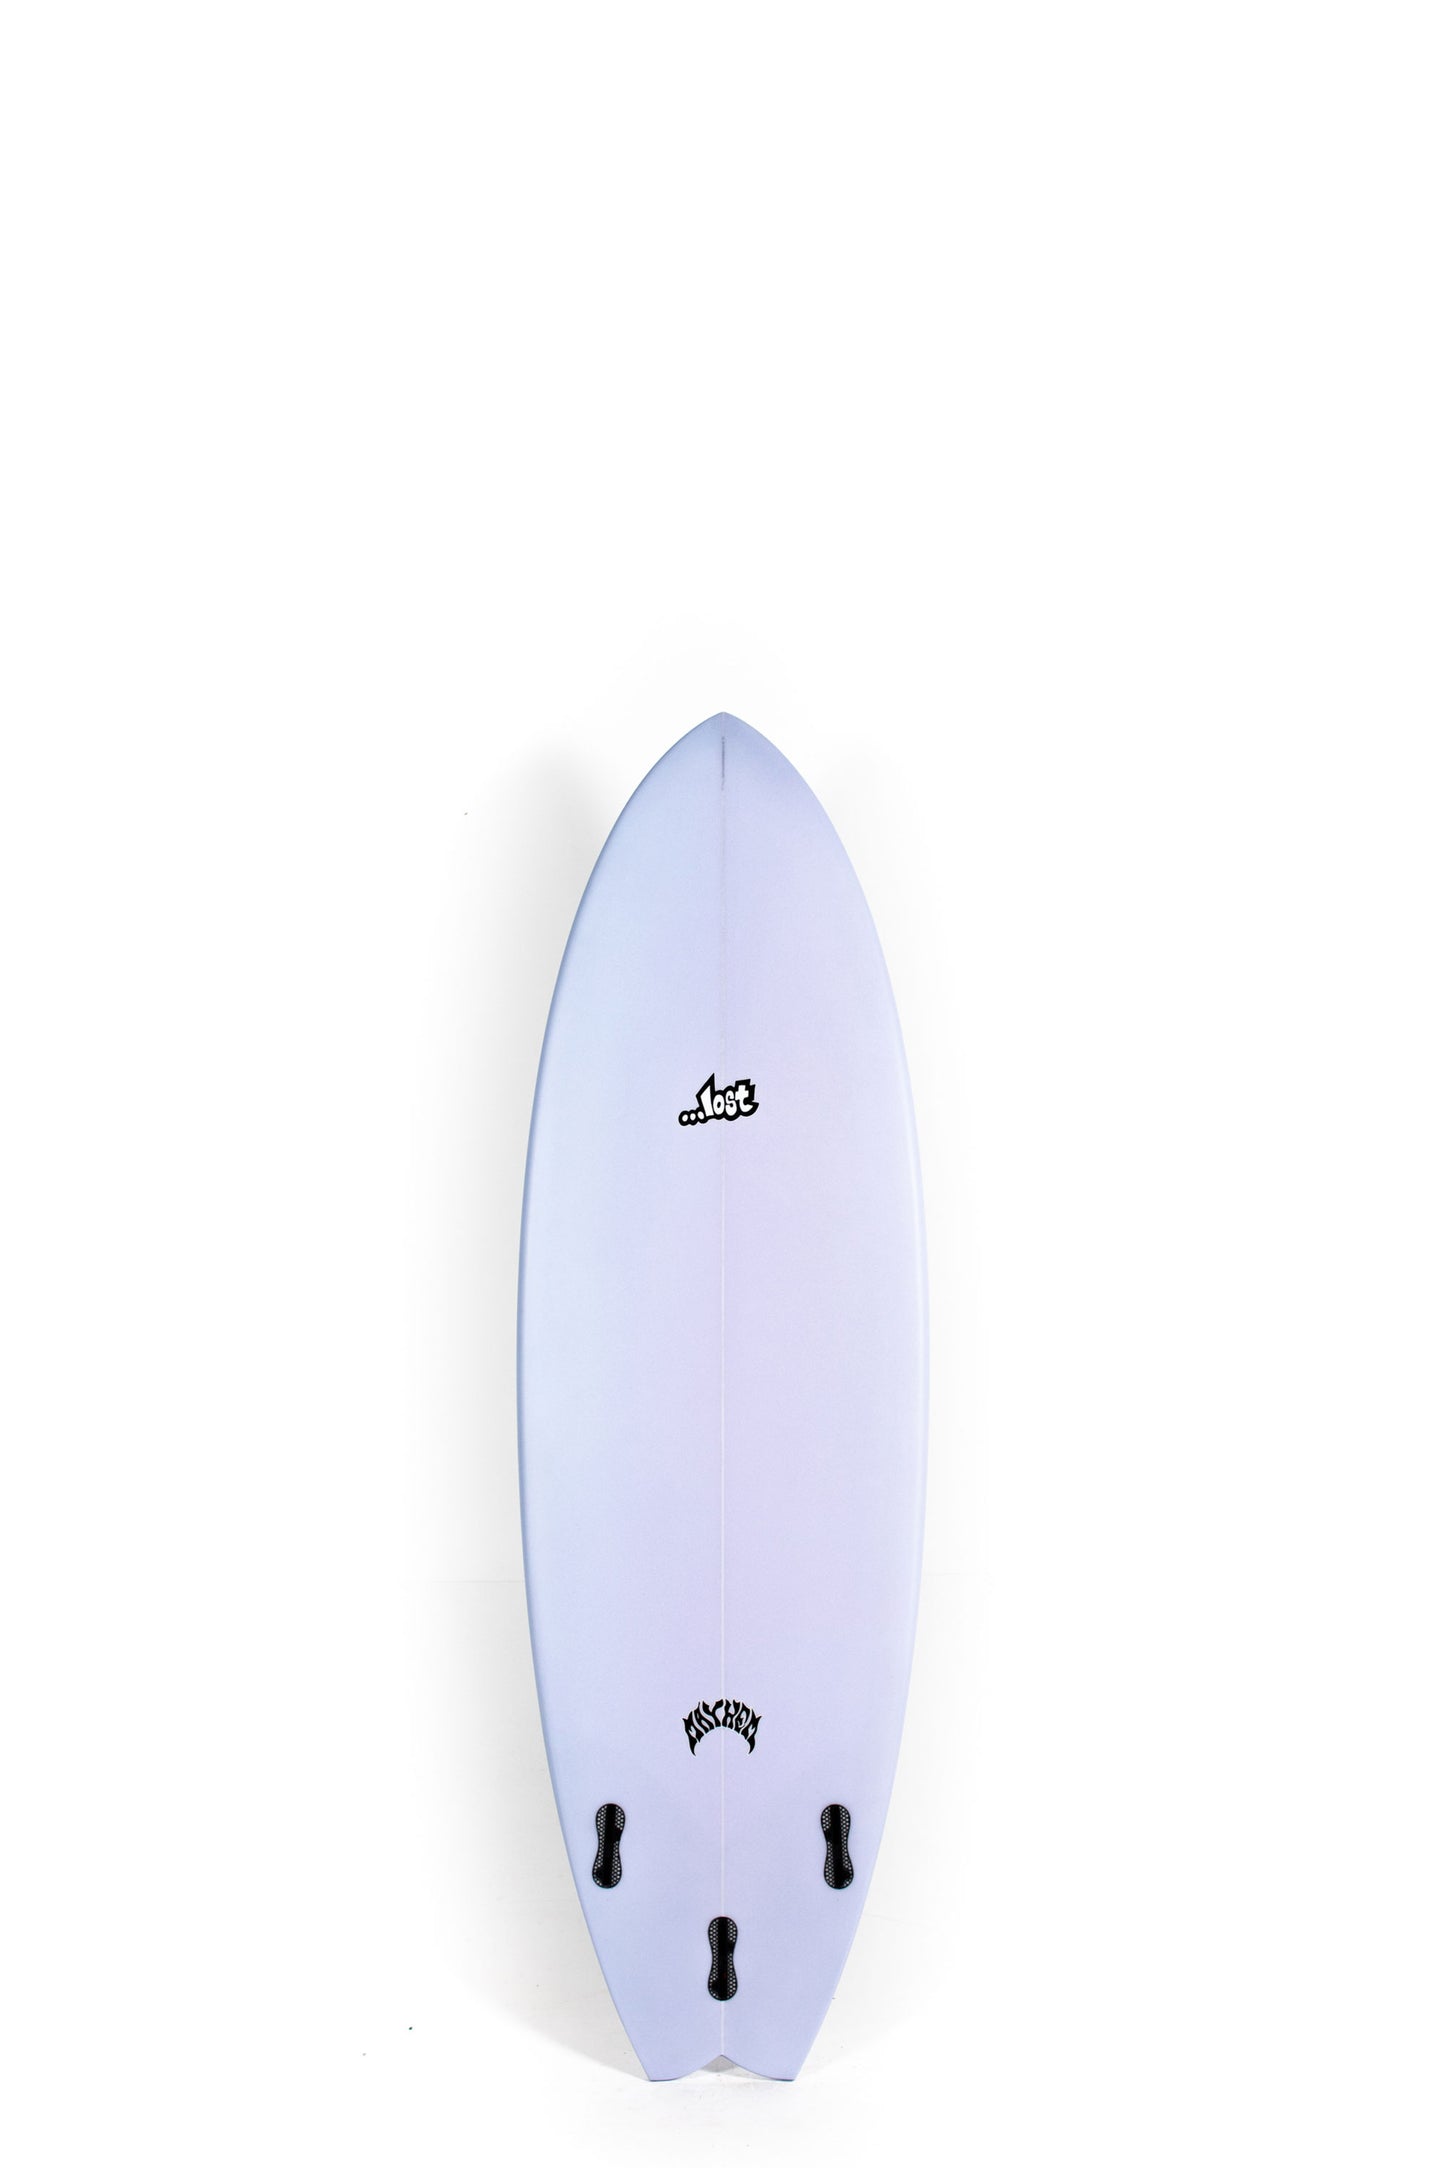 LOST SURFBOARDS | Available online at PUKAS SURF SHOP